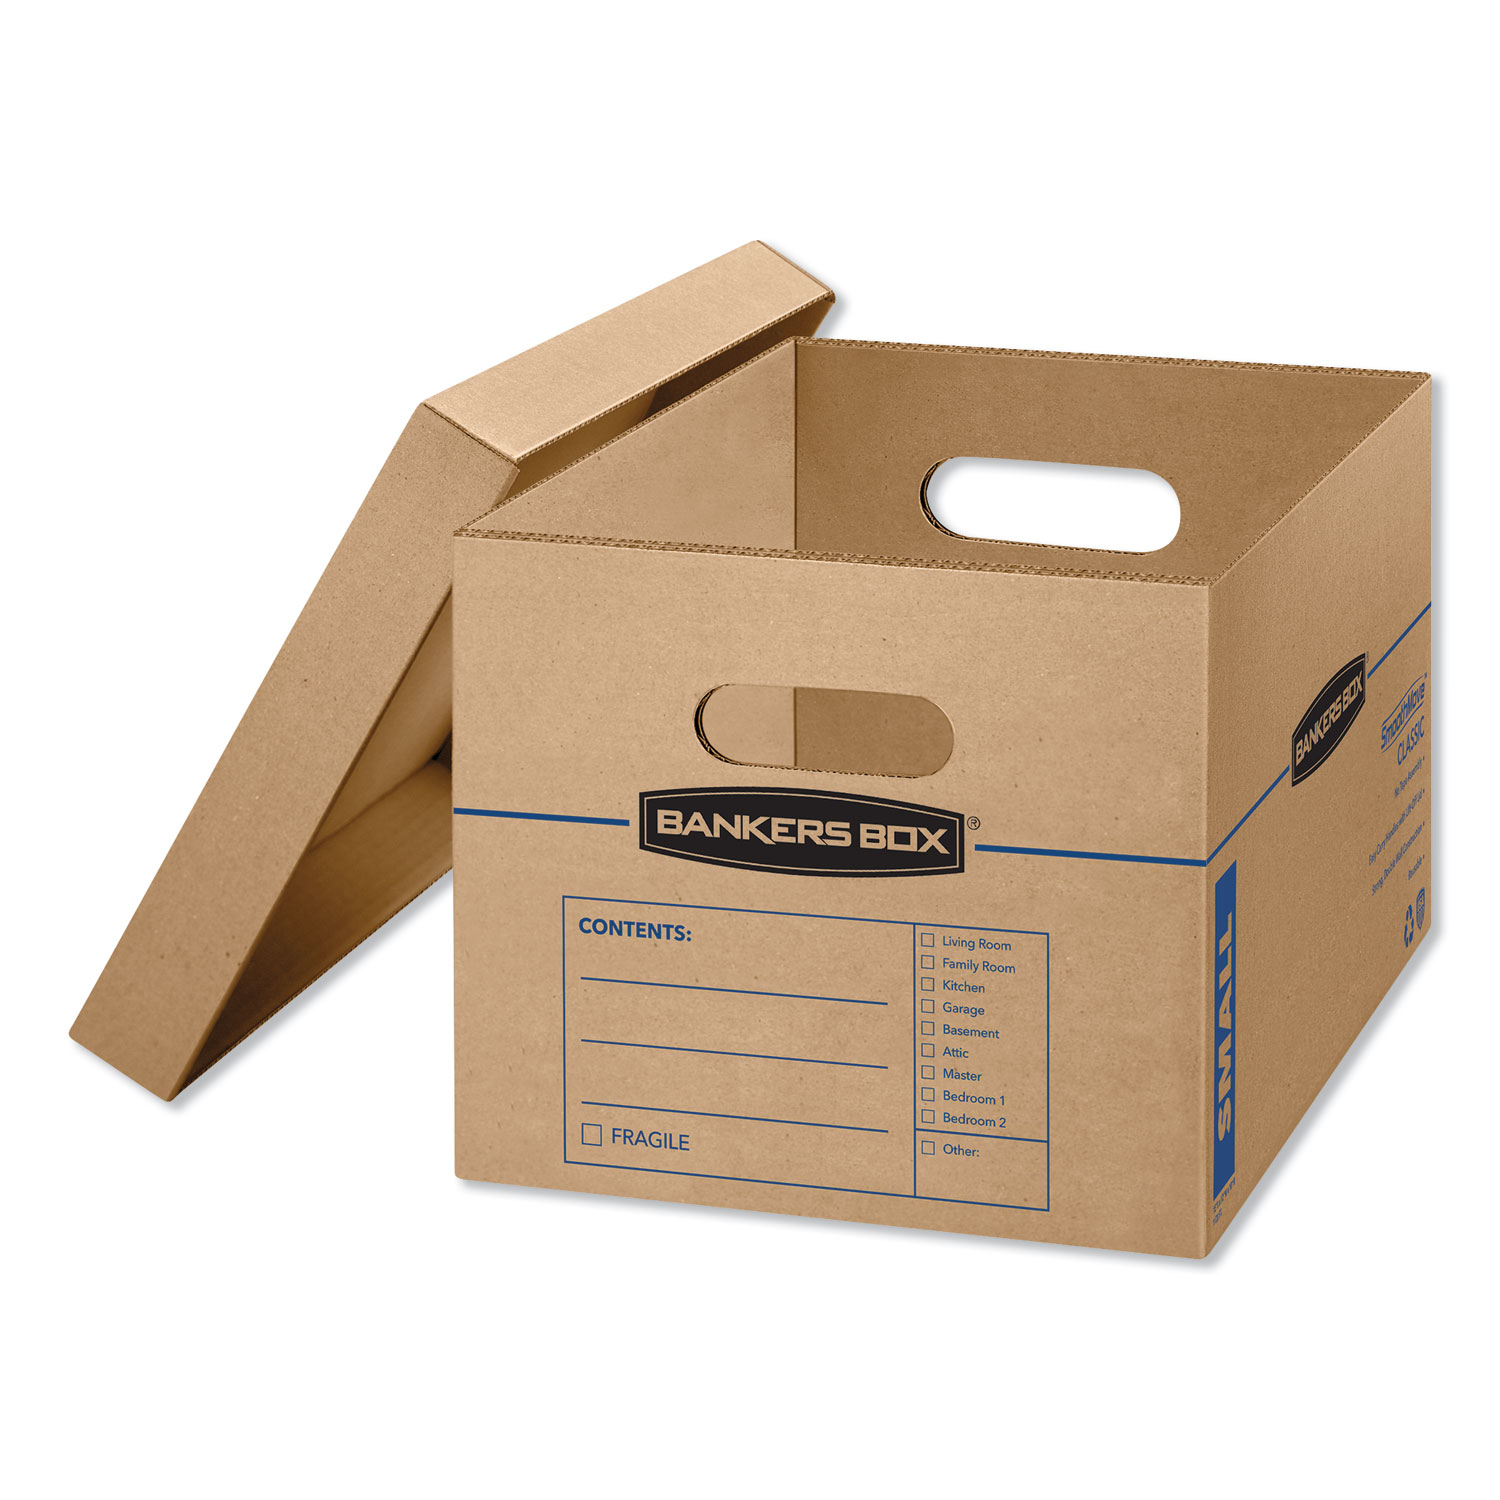  Bankers Box 7714209 SmoothMove Classic Moving & Storage Boxes, Small, Half Slotted Container (HSC), 15 x 12 x 10, Brown Kraft/Blue, 15/Carton (FEL7714209) 